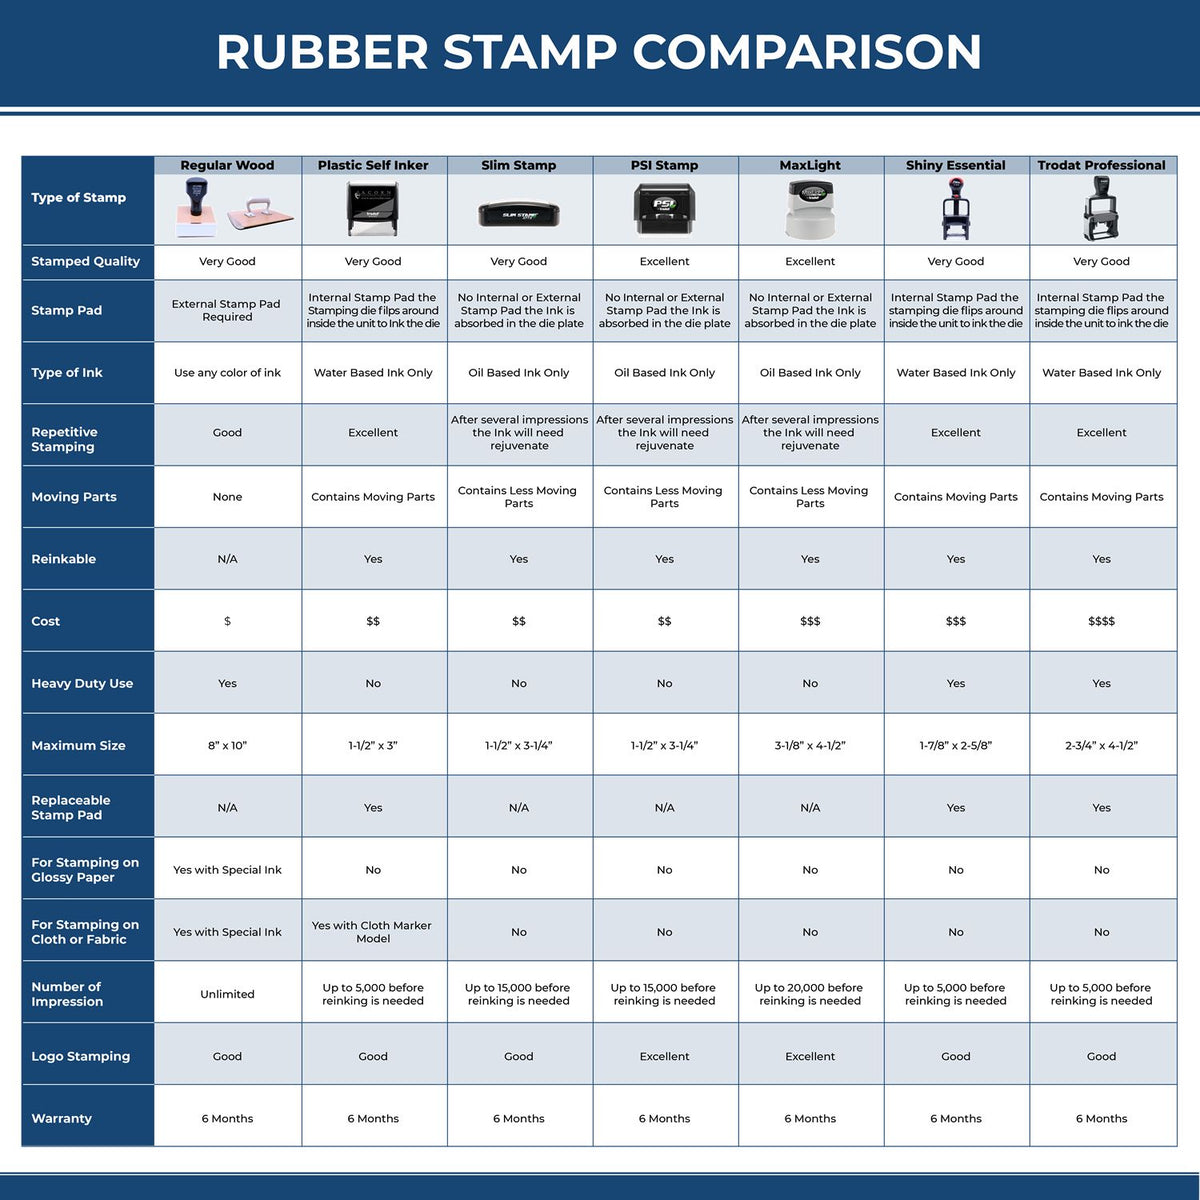 Large Ira Account Rubber Stamp 4565R Rubber Stamp Comparison